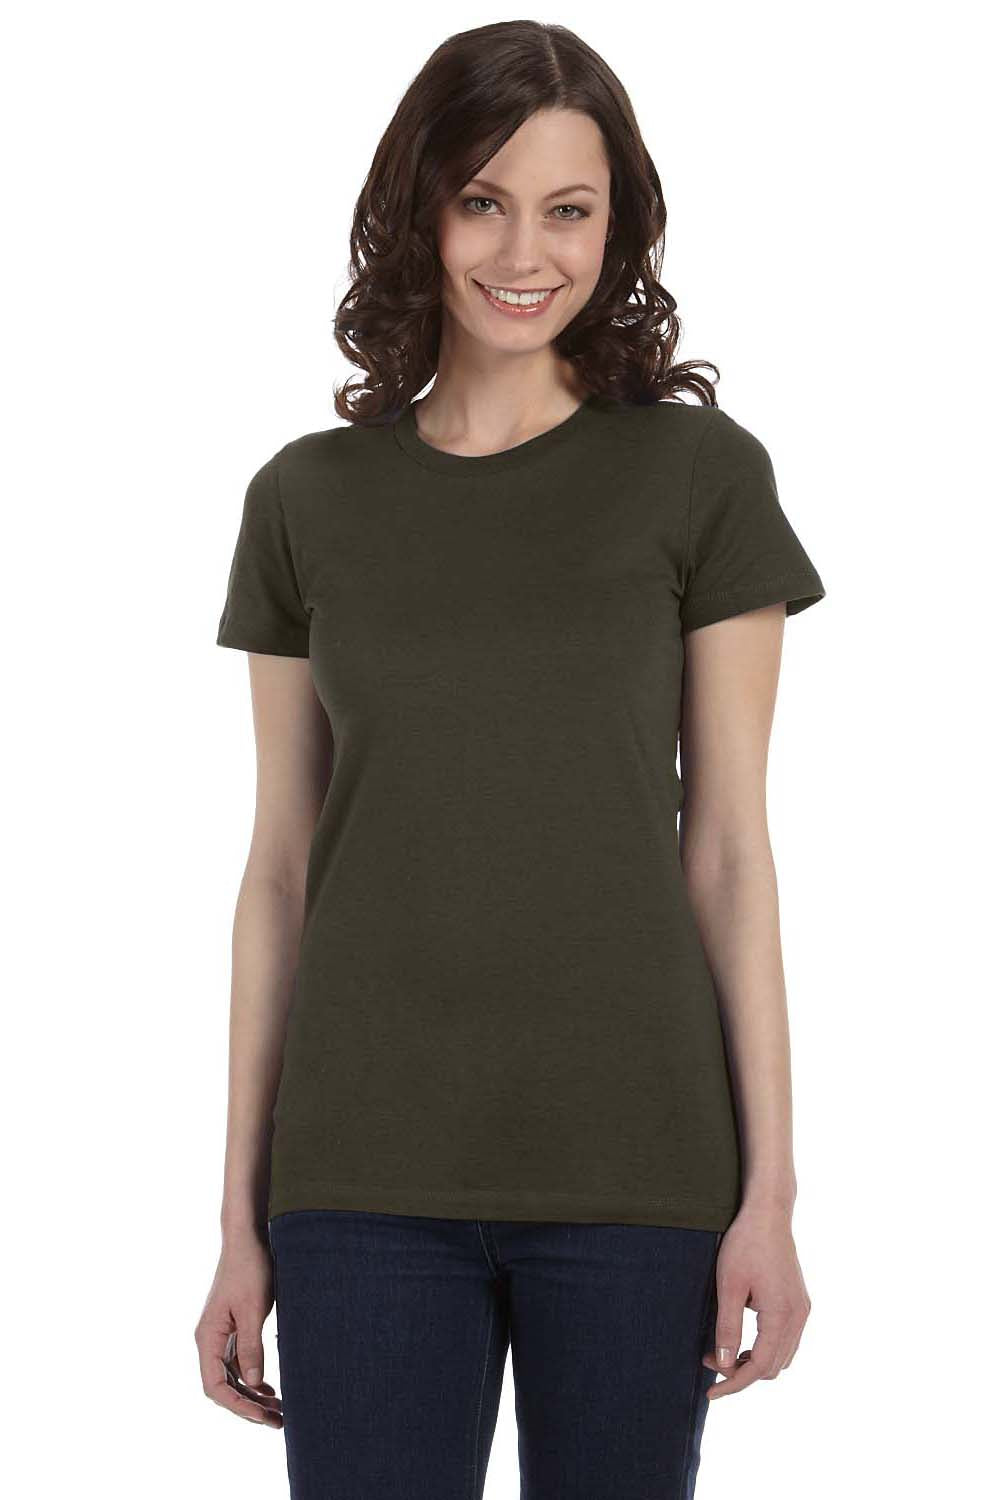 Bella + Canvas 6004 Womens The Favorite Short Sleeve Crewneck T-Shirt Army Green Front